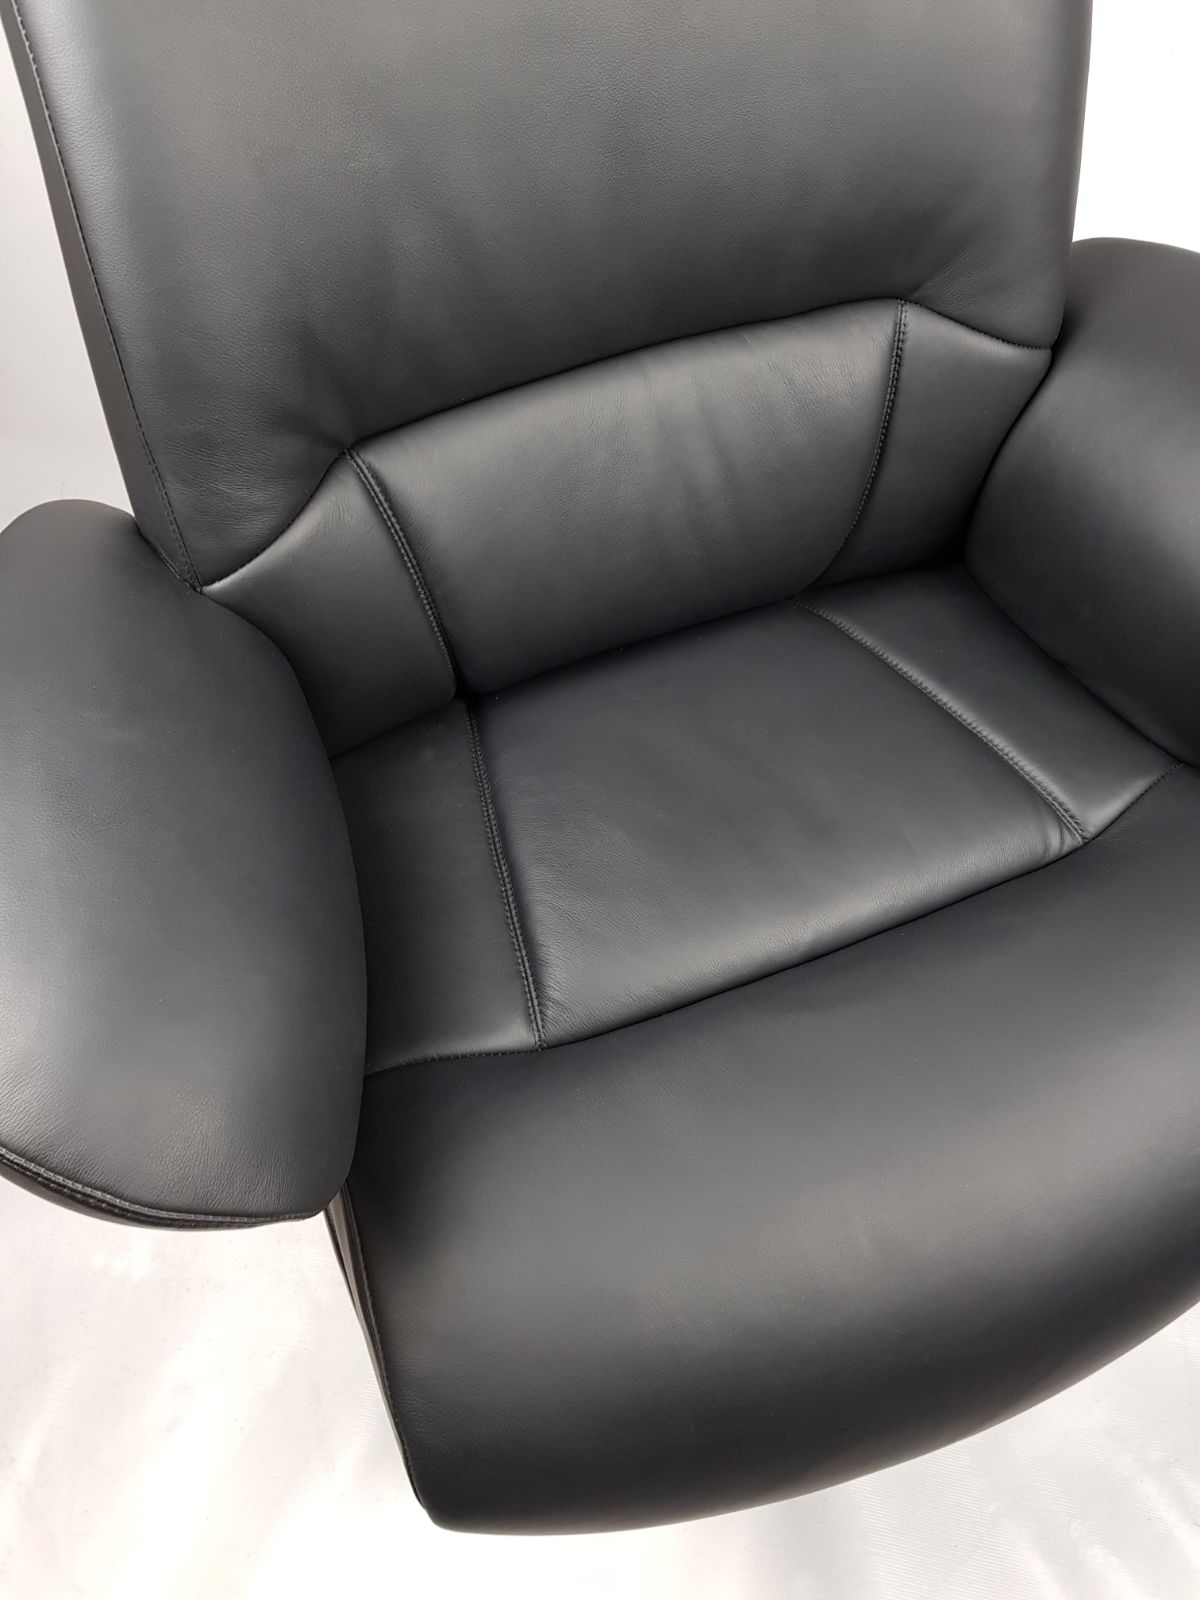 Large Luxury Executive Office Chair with Genuine Black Leather - YS1605A